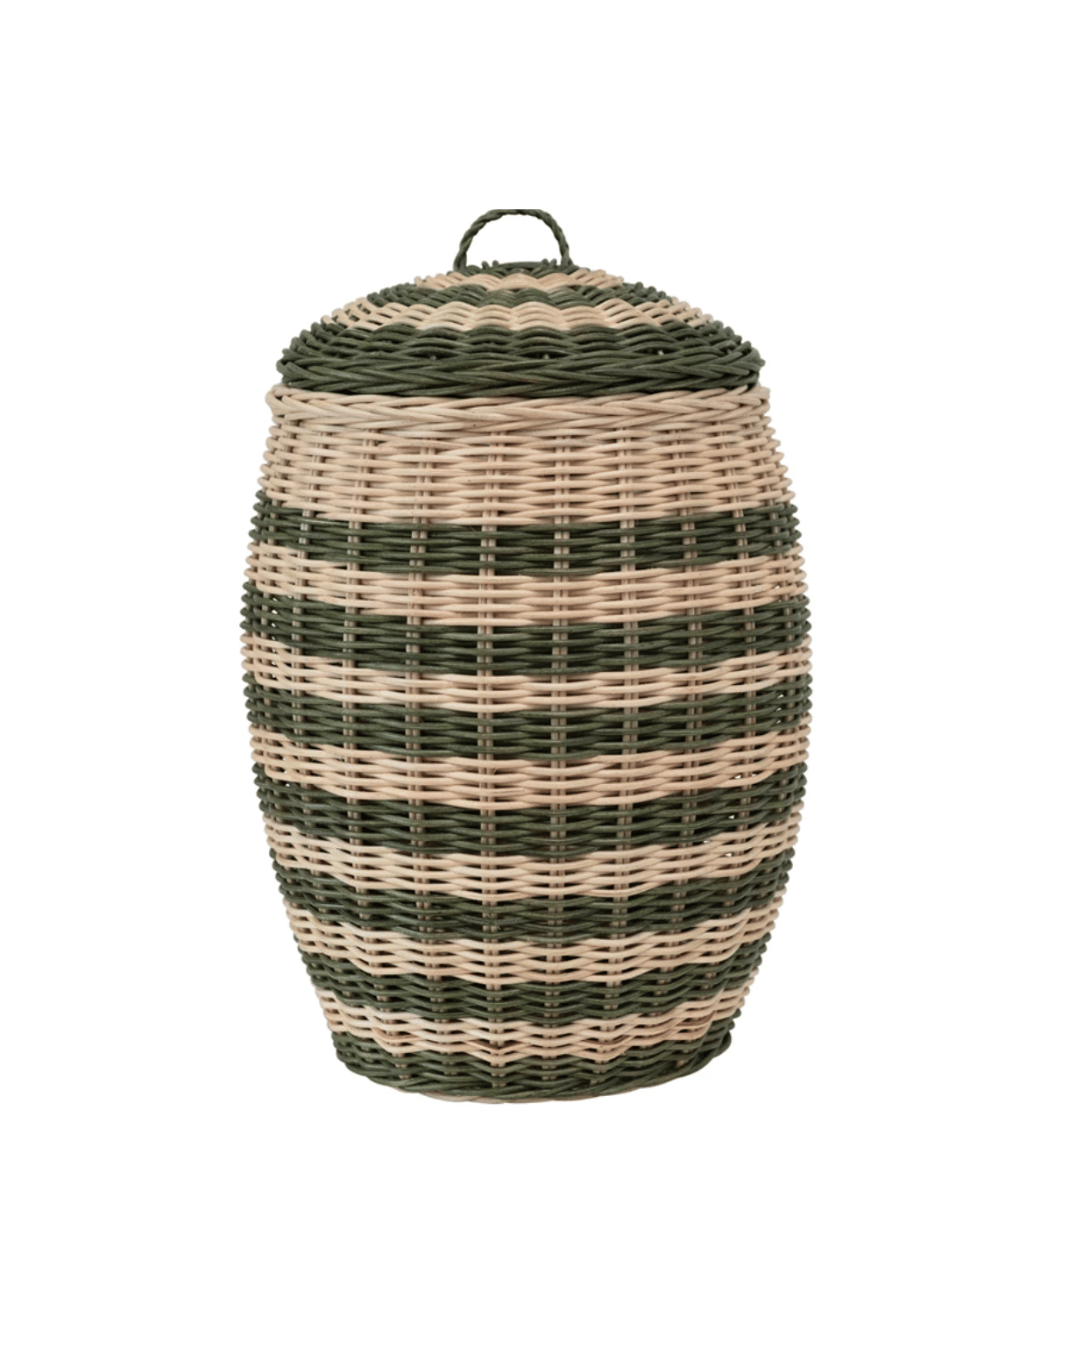 A tall, cylindrical Green Striped Basket with a lid from Creative Co-op, featuring alternating horizontal stripes of natural and pale green colors, isolated on a white background, ideal for a Scottsdale Arizona bungalow.